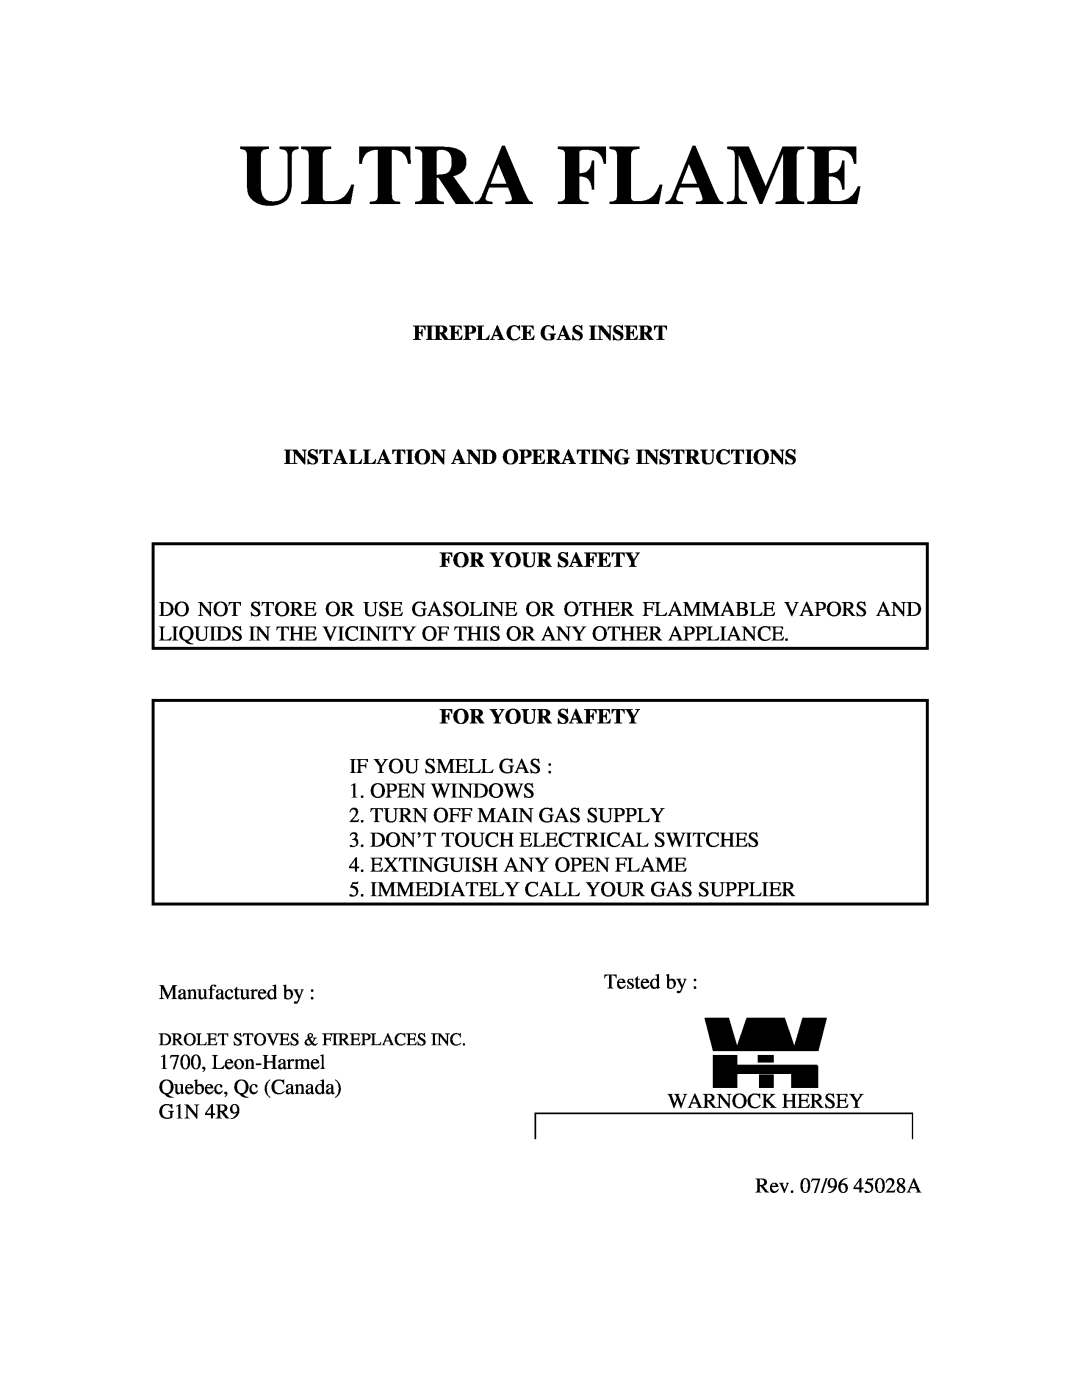 Drolet 36C03U TYPE 139 manual Fireplace Gas Insert, Installation And Operating Instructions, For Your Safety, Ultra Flame 